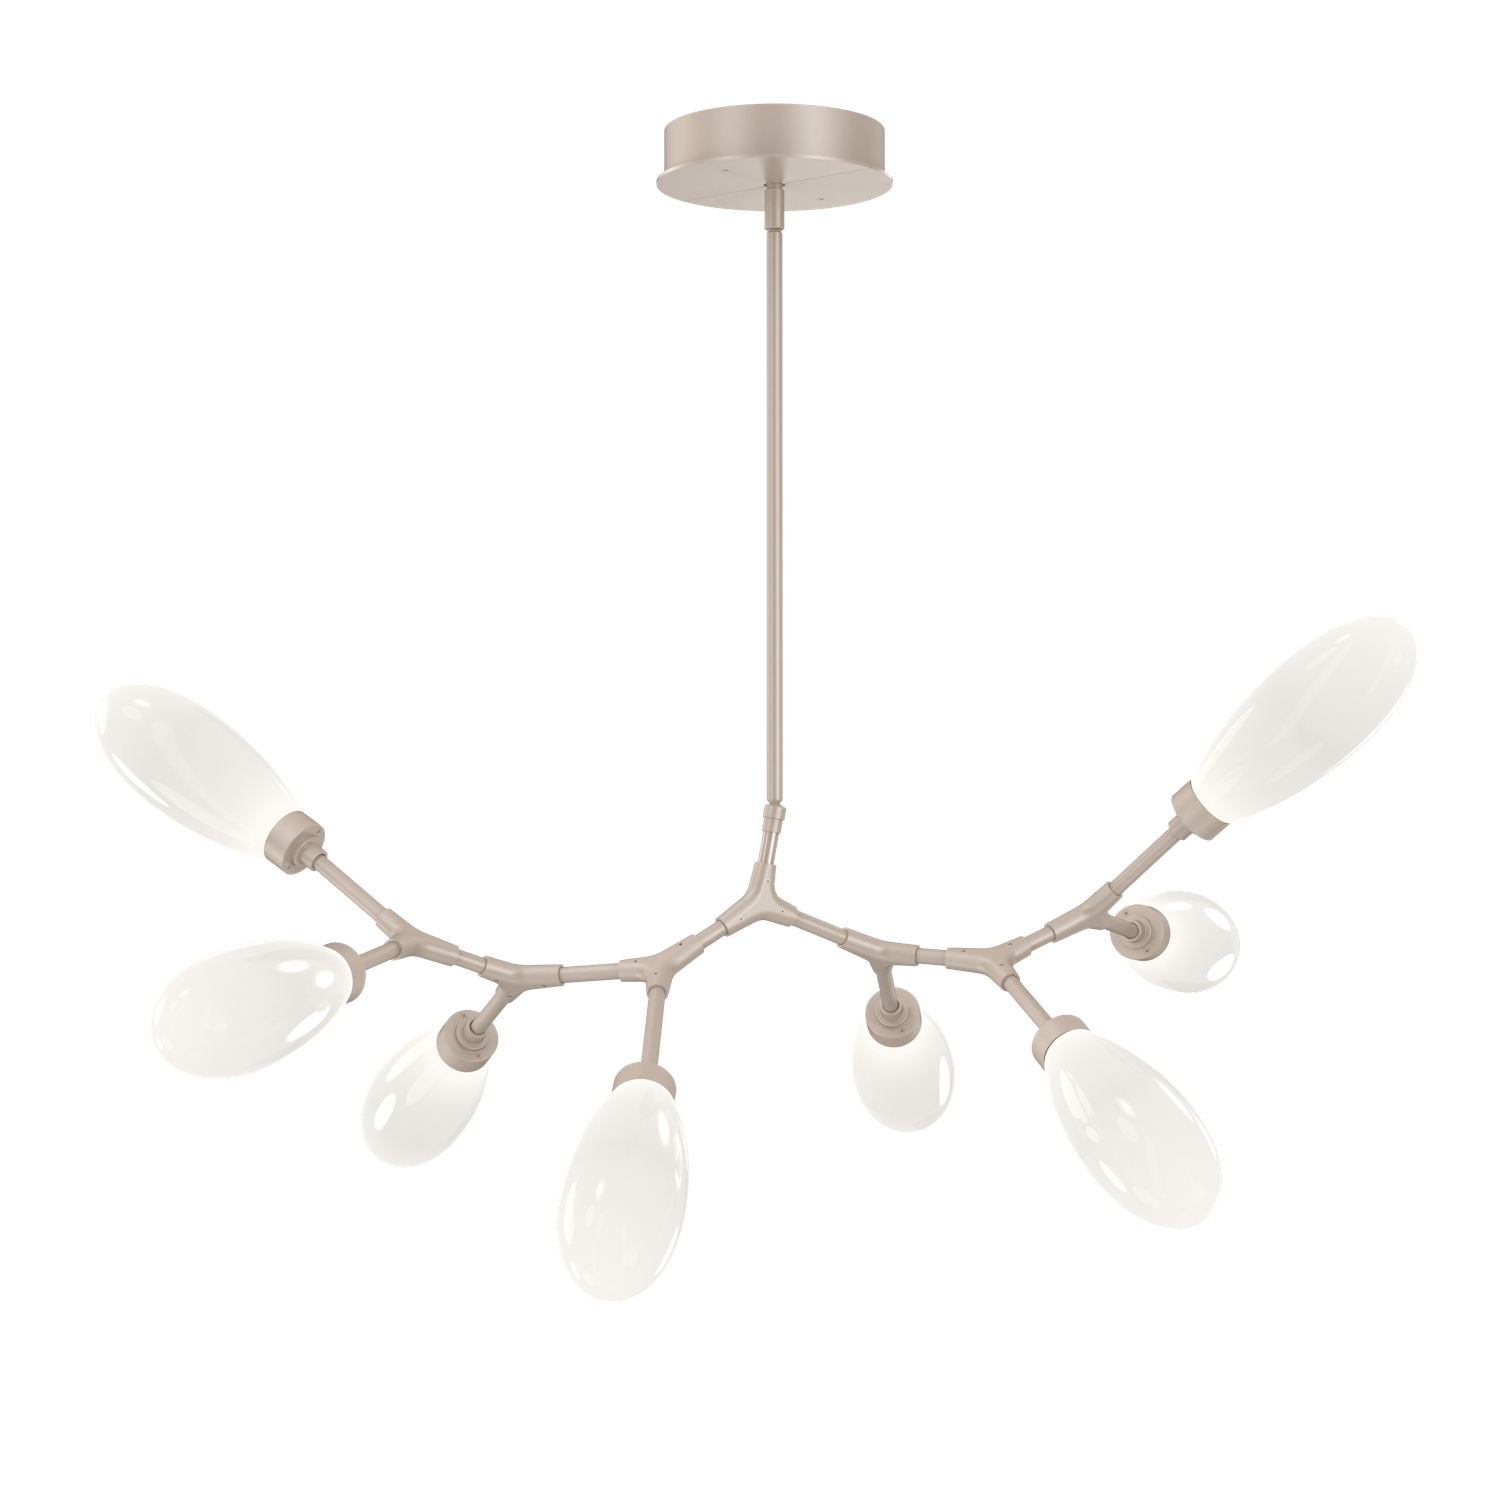 PLB0071-BB-BS-WL-LL-Hammerton-Studio-Fiori-8-light-organic-branch-chandelier-with-metallic-beige-silver-finish-and-opal-white-glass-shades-and-LED-lamping